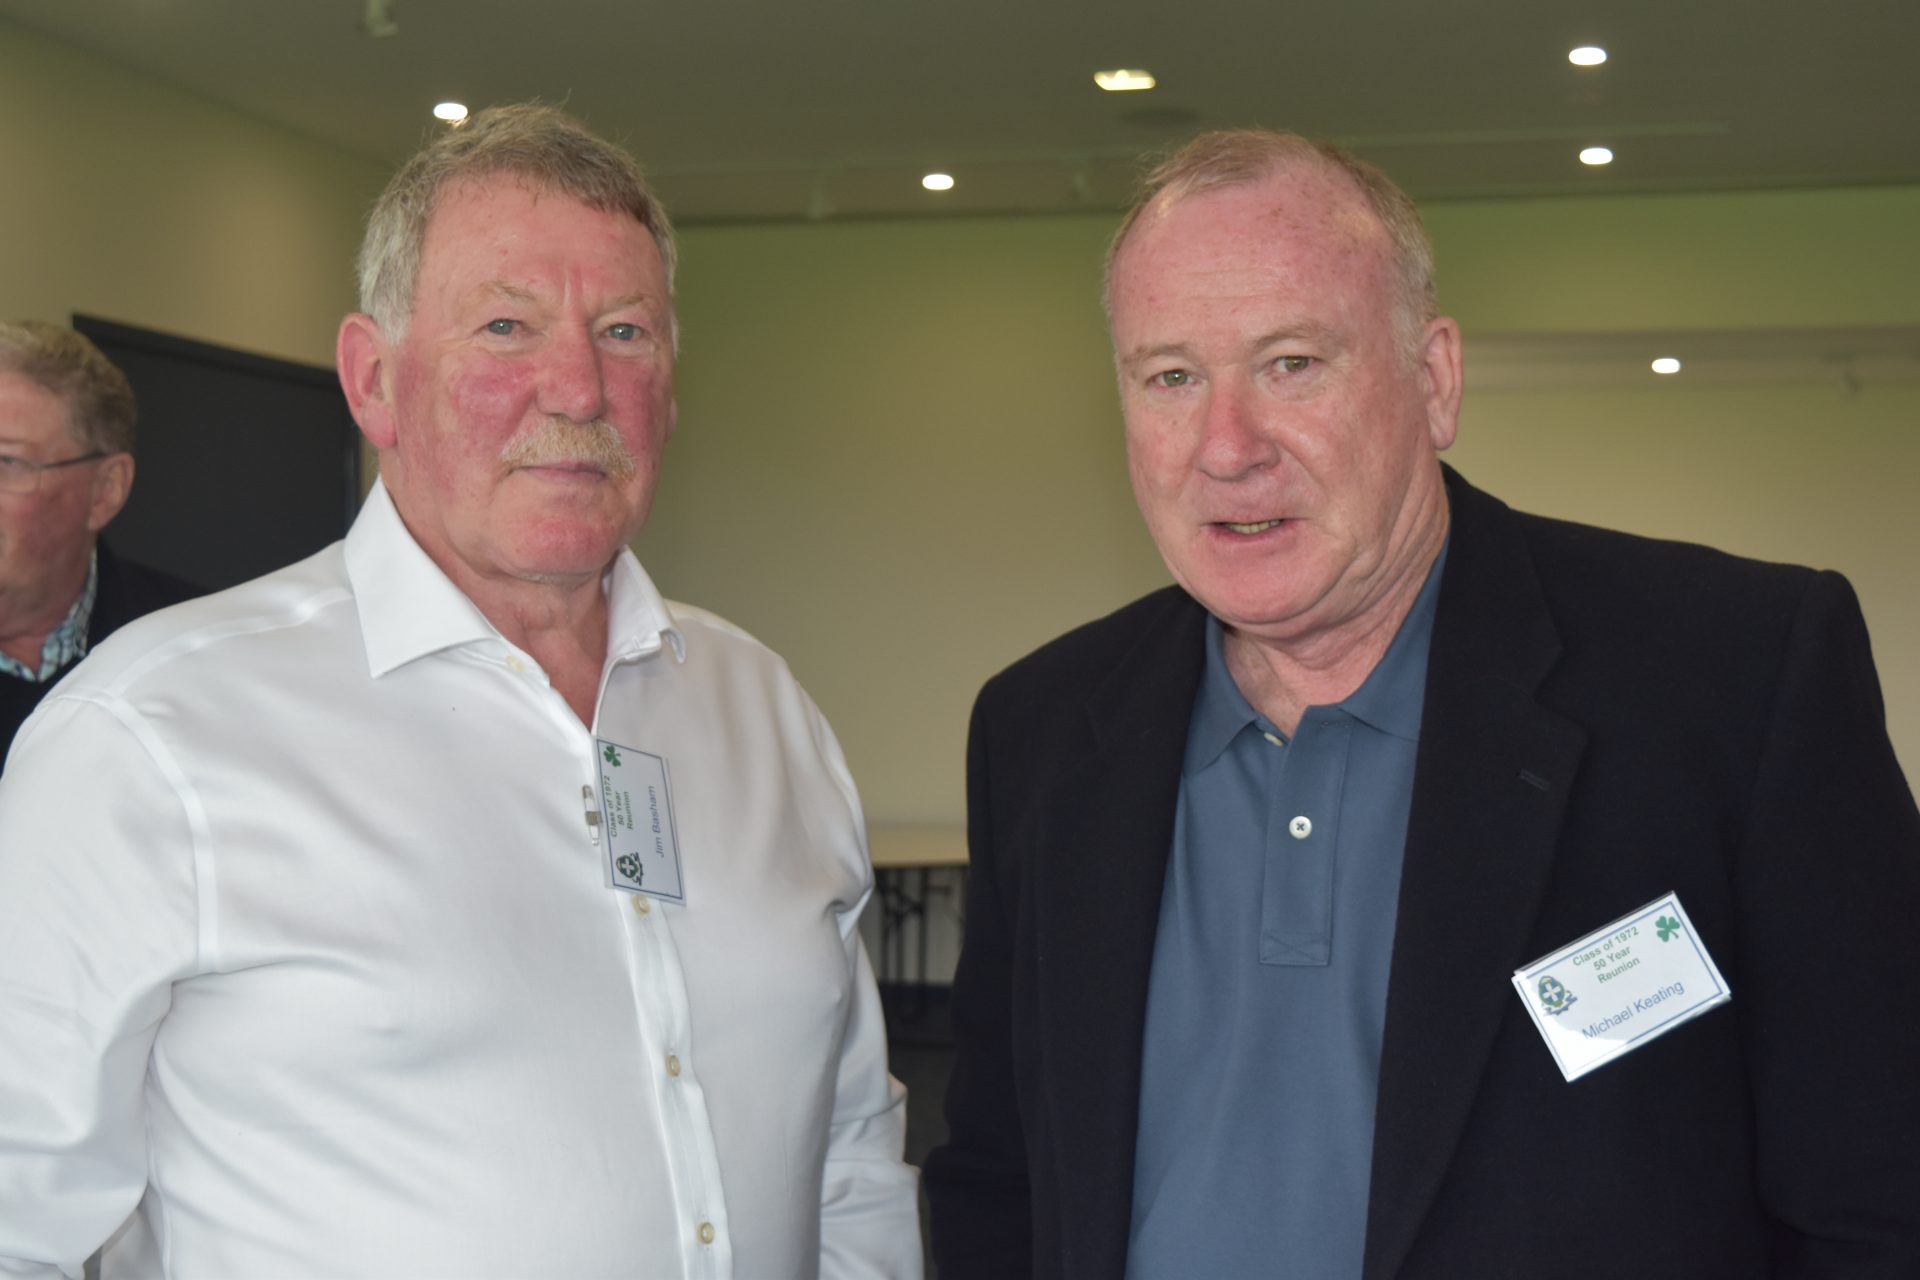 Class of 1972 Make Their Return to St. Patrick's College 50 Years